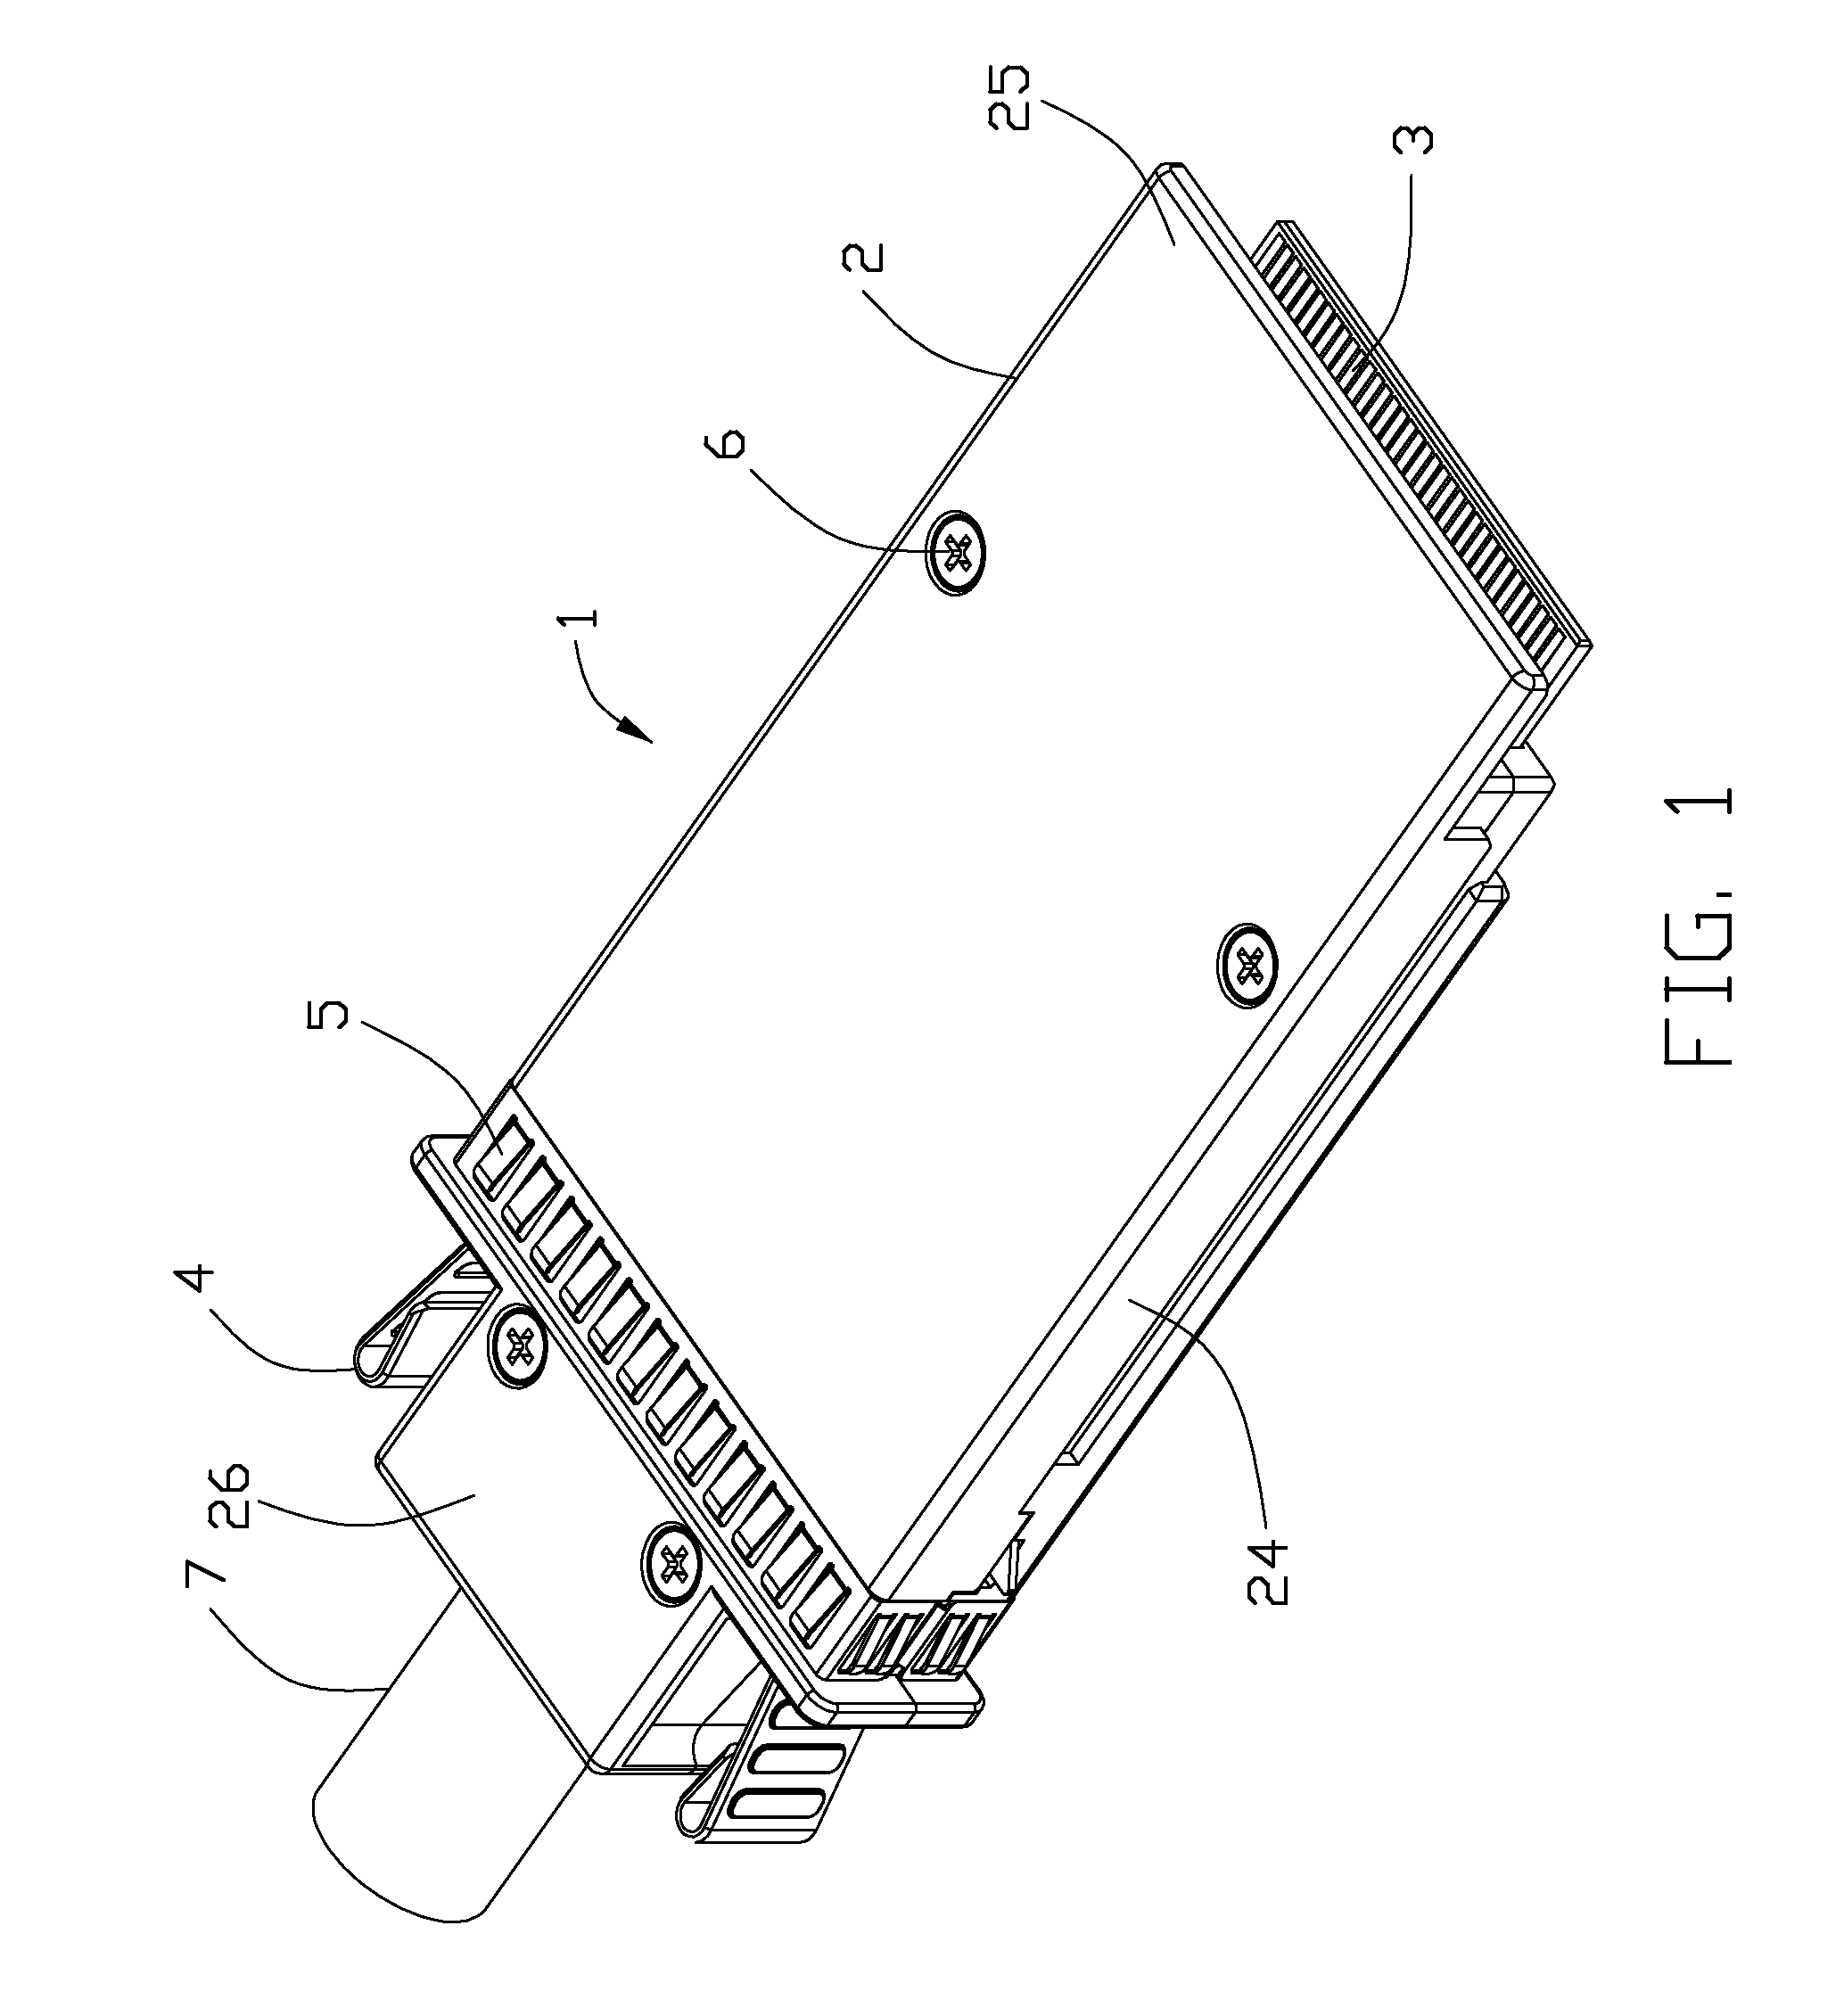 Electrical connector assembly wth improved latching mechanism